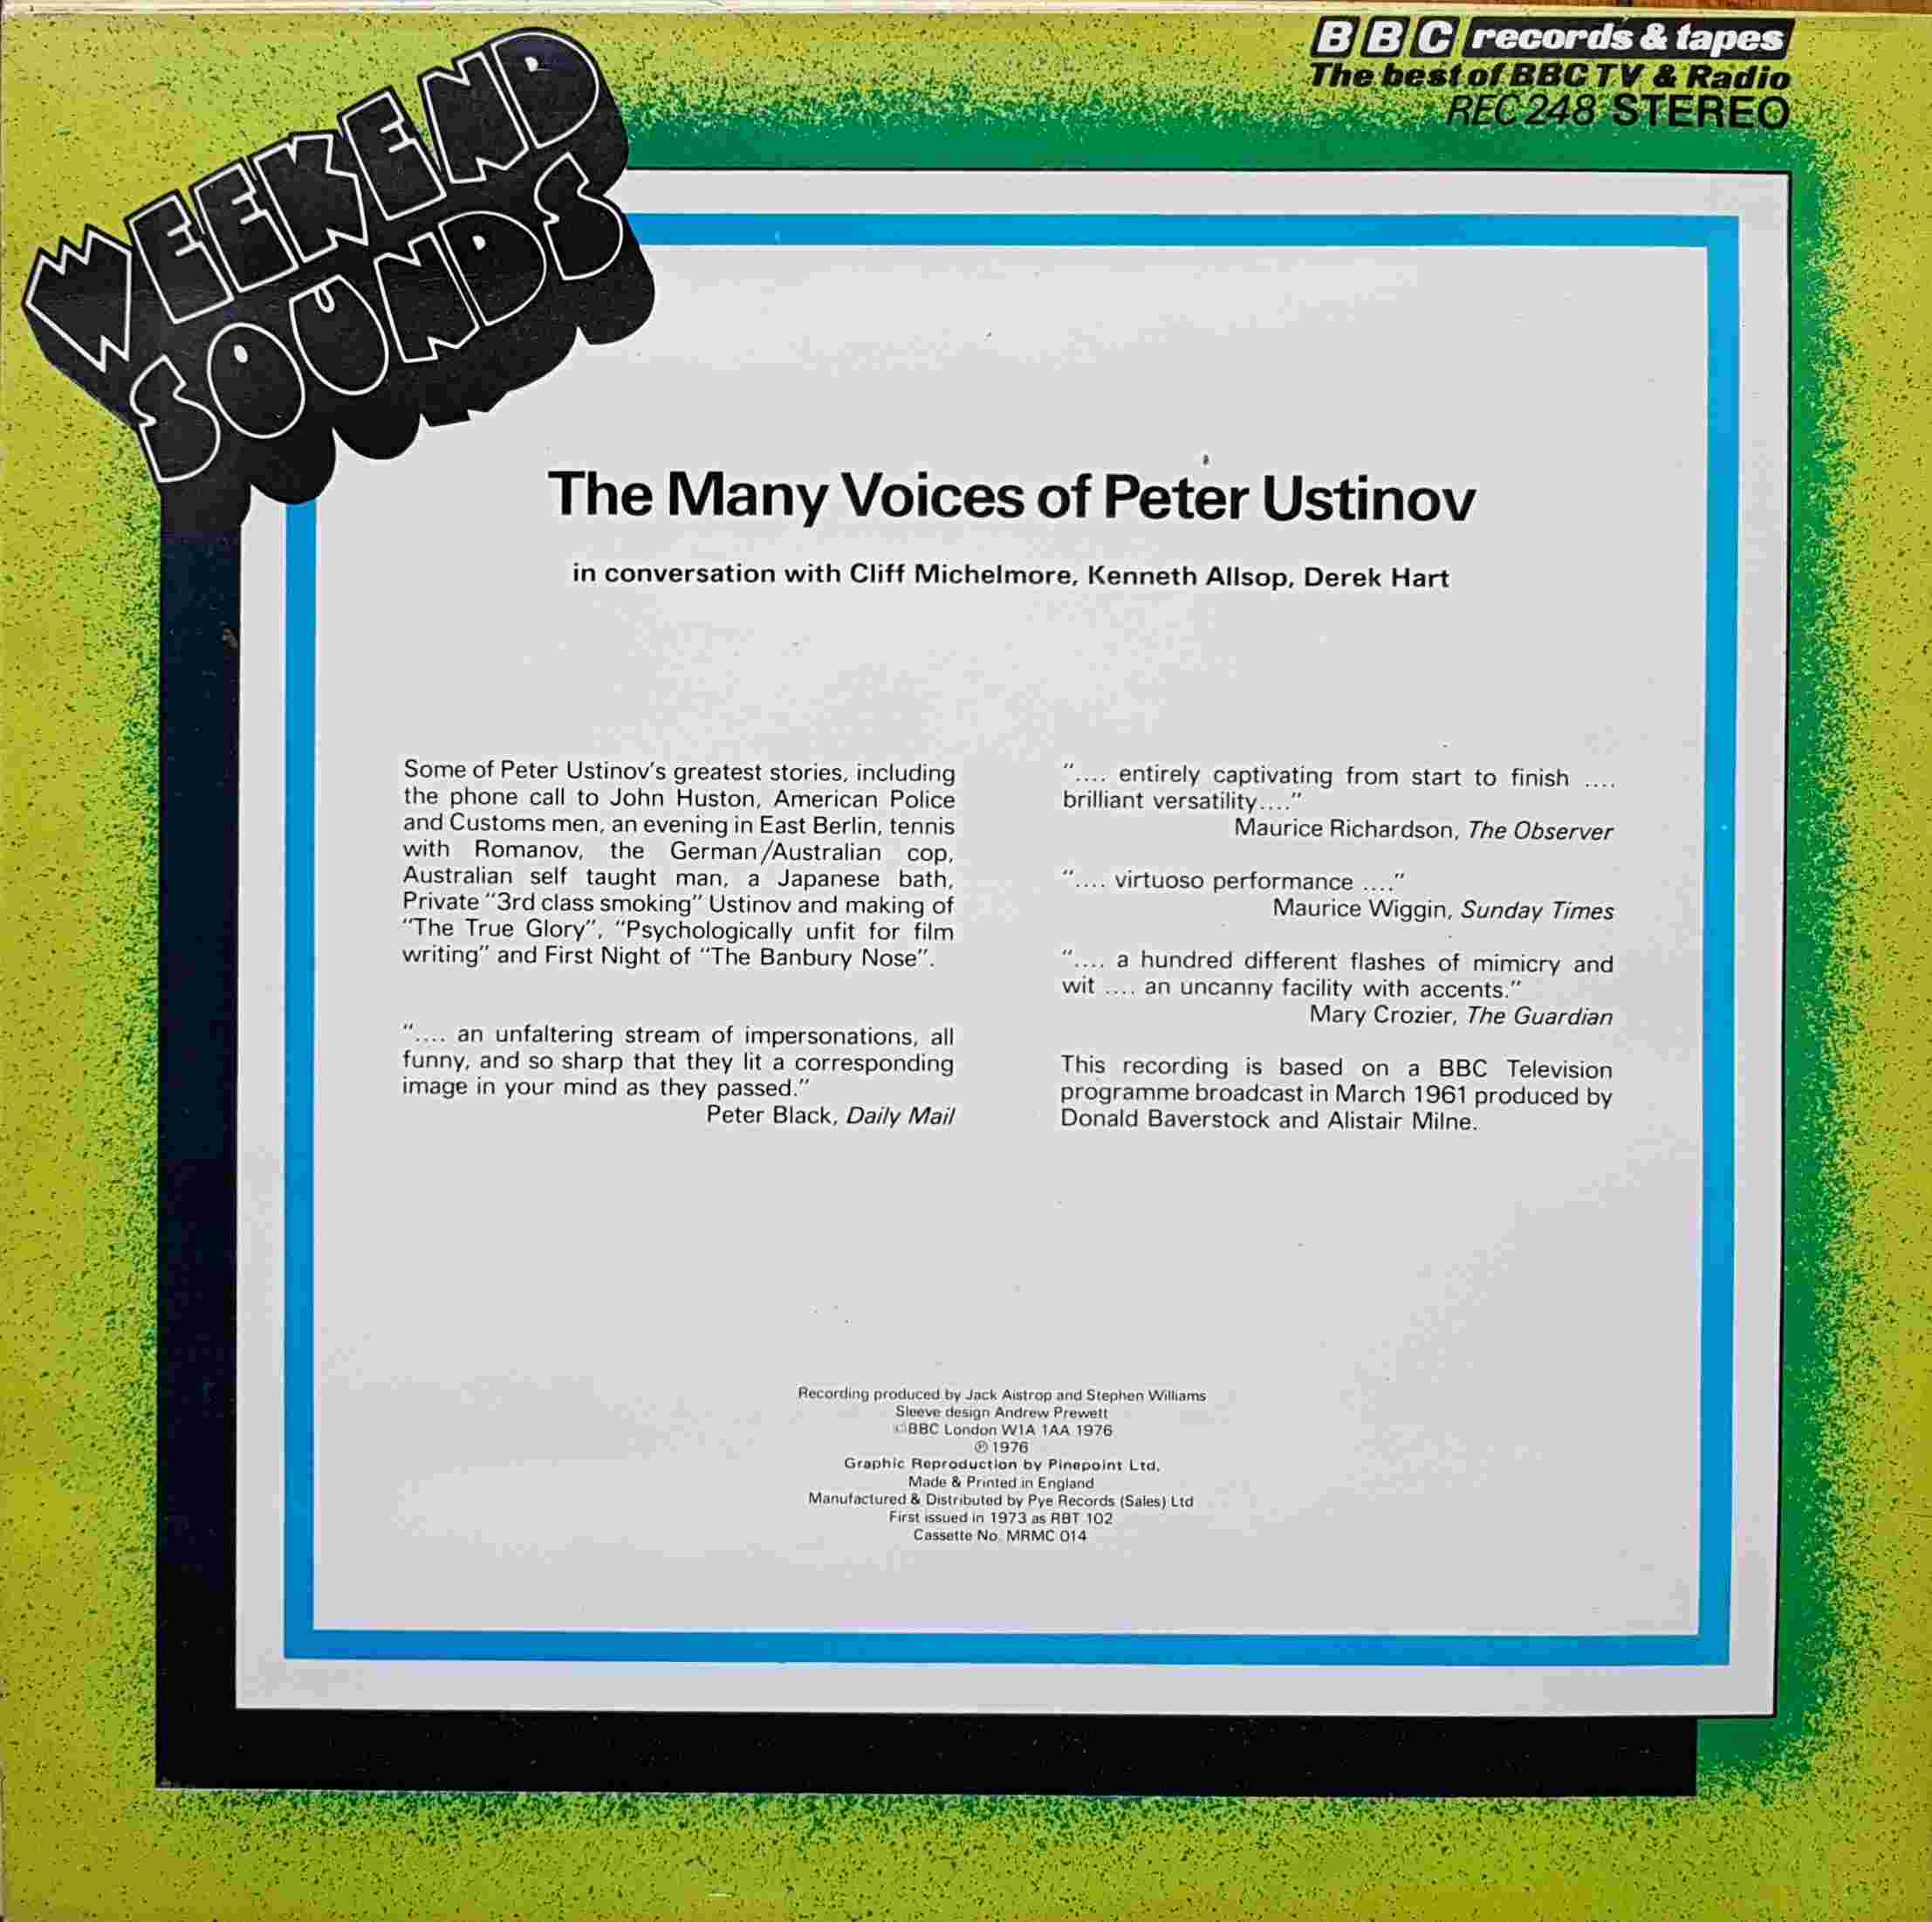 Picture of REC 248 The many voices of Peter Ustinov by artist Peter Ustinov from the BBC records and Tapes library